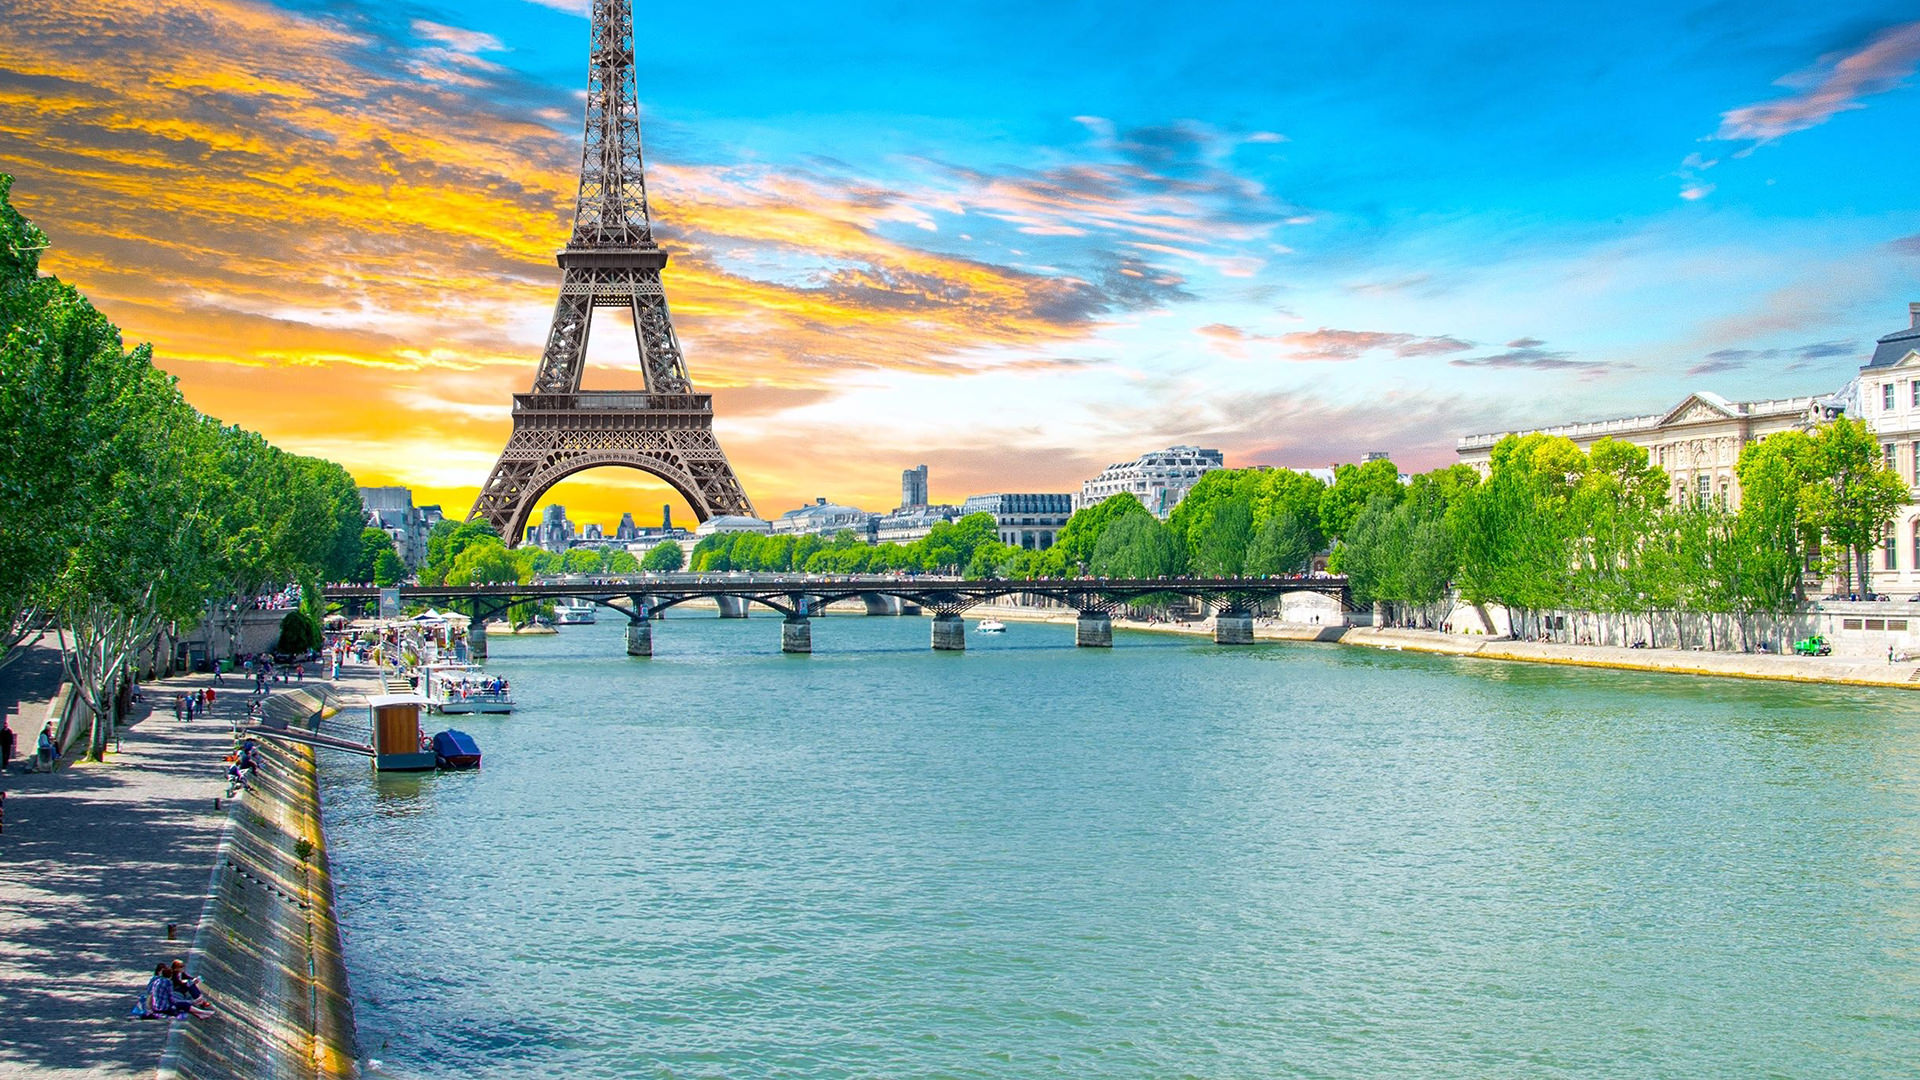 A view of the Eifle tower in Paris, France